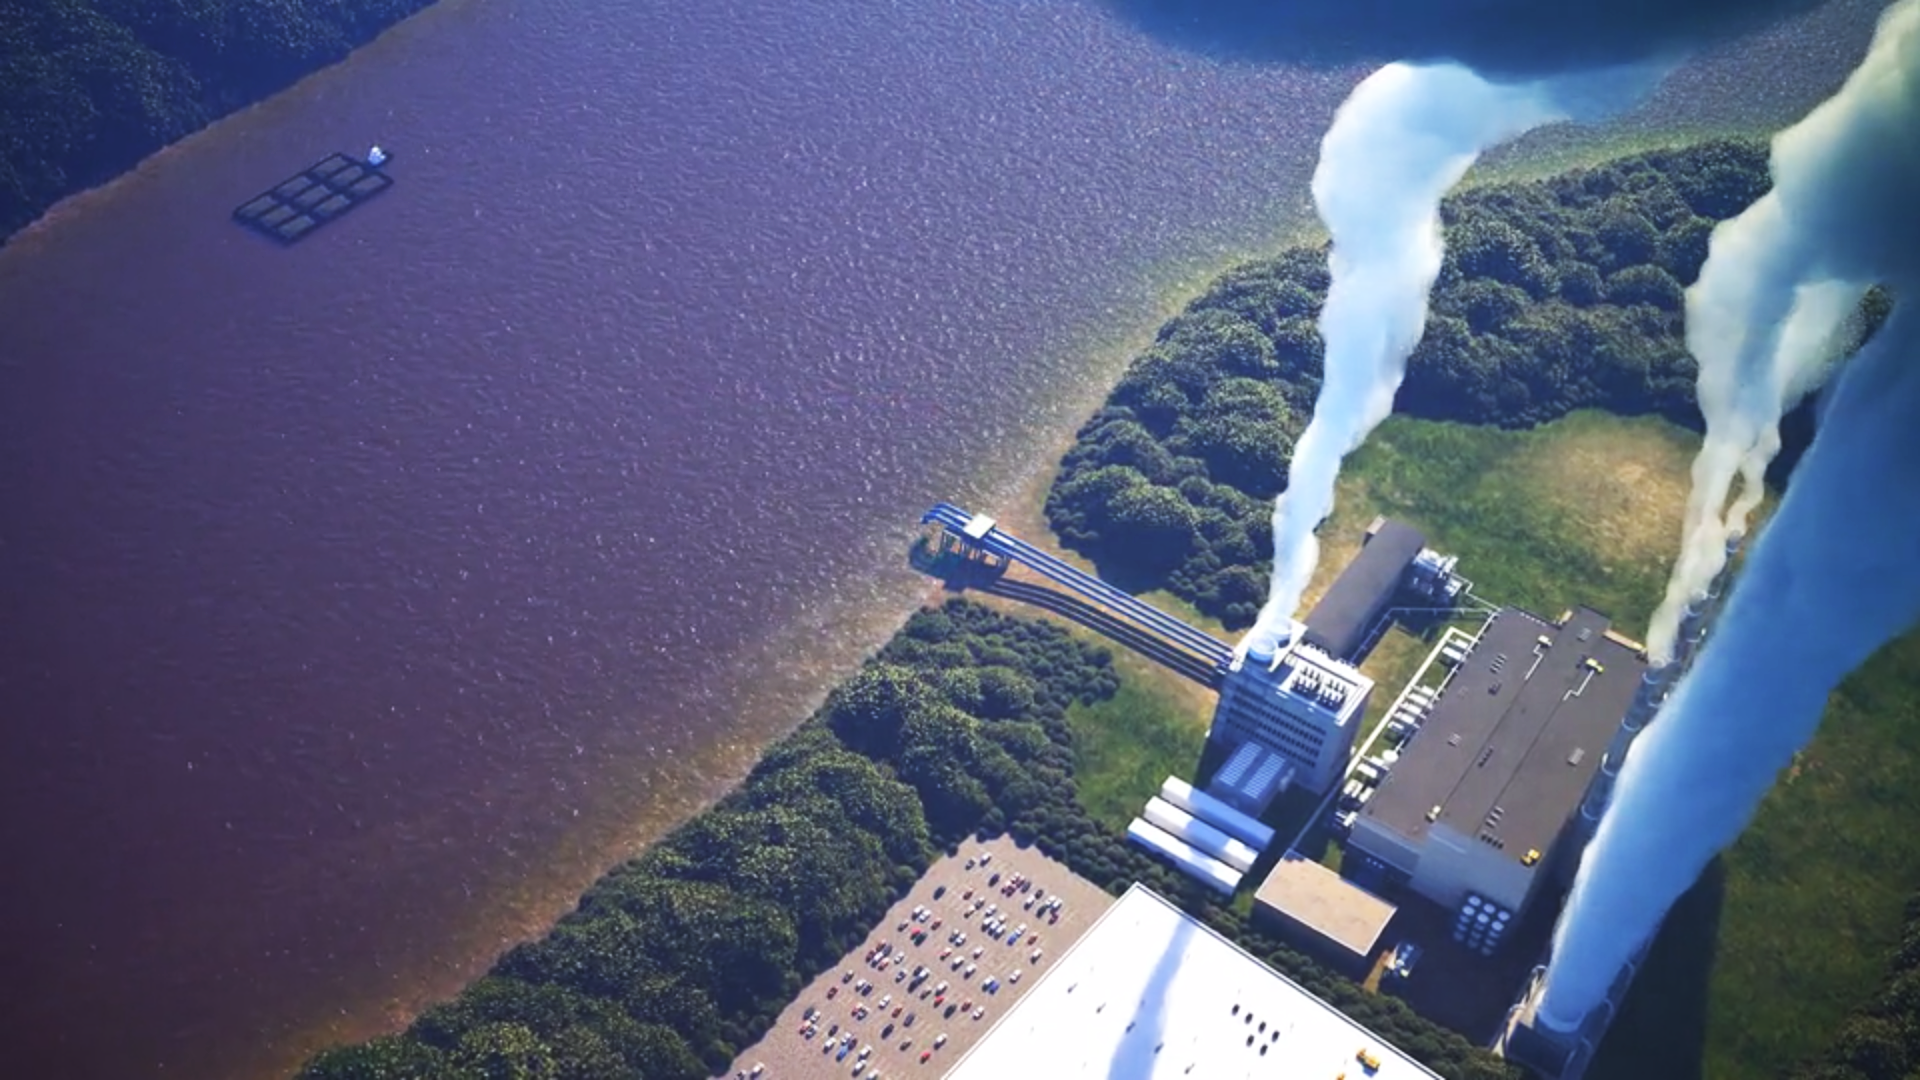 This is a still image from a PR movie showing a birds eye view looking down at the Ohio river, featuring buildings emitting smoke in the lower right hand corner.